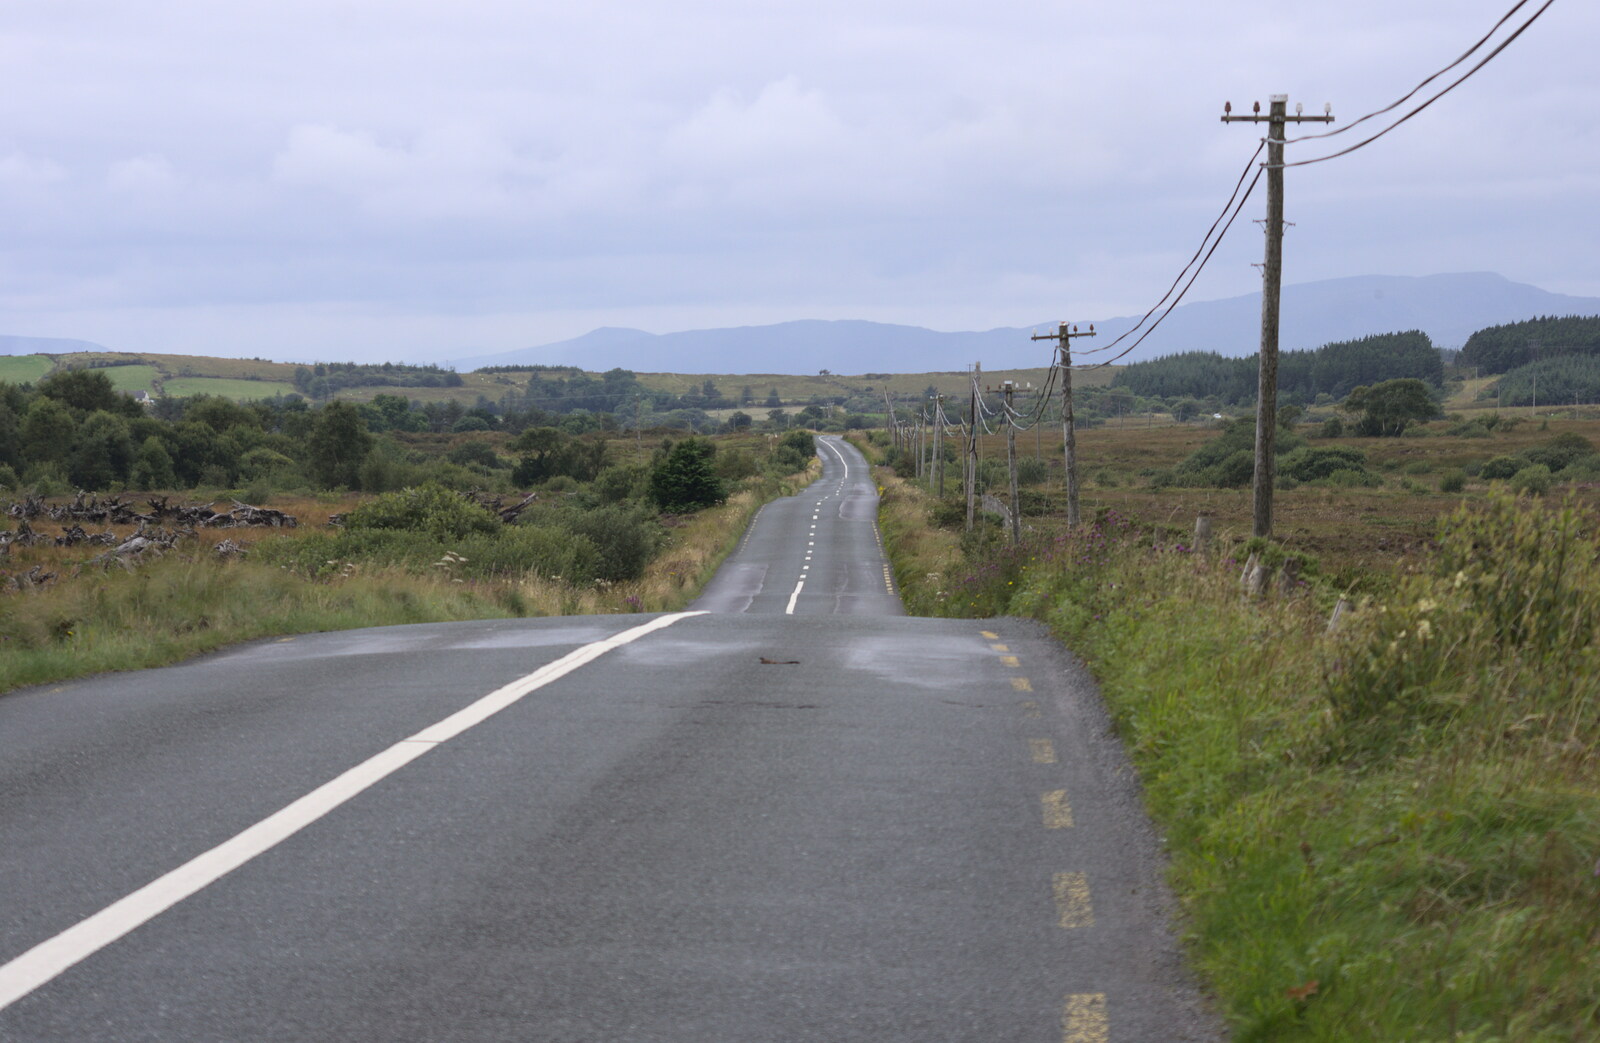 A ribbon road from From Achill to Strokestown, Mayo and Roscommon, Ireland - 10th August 2017